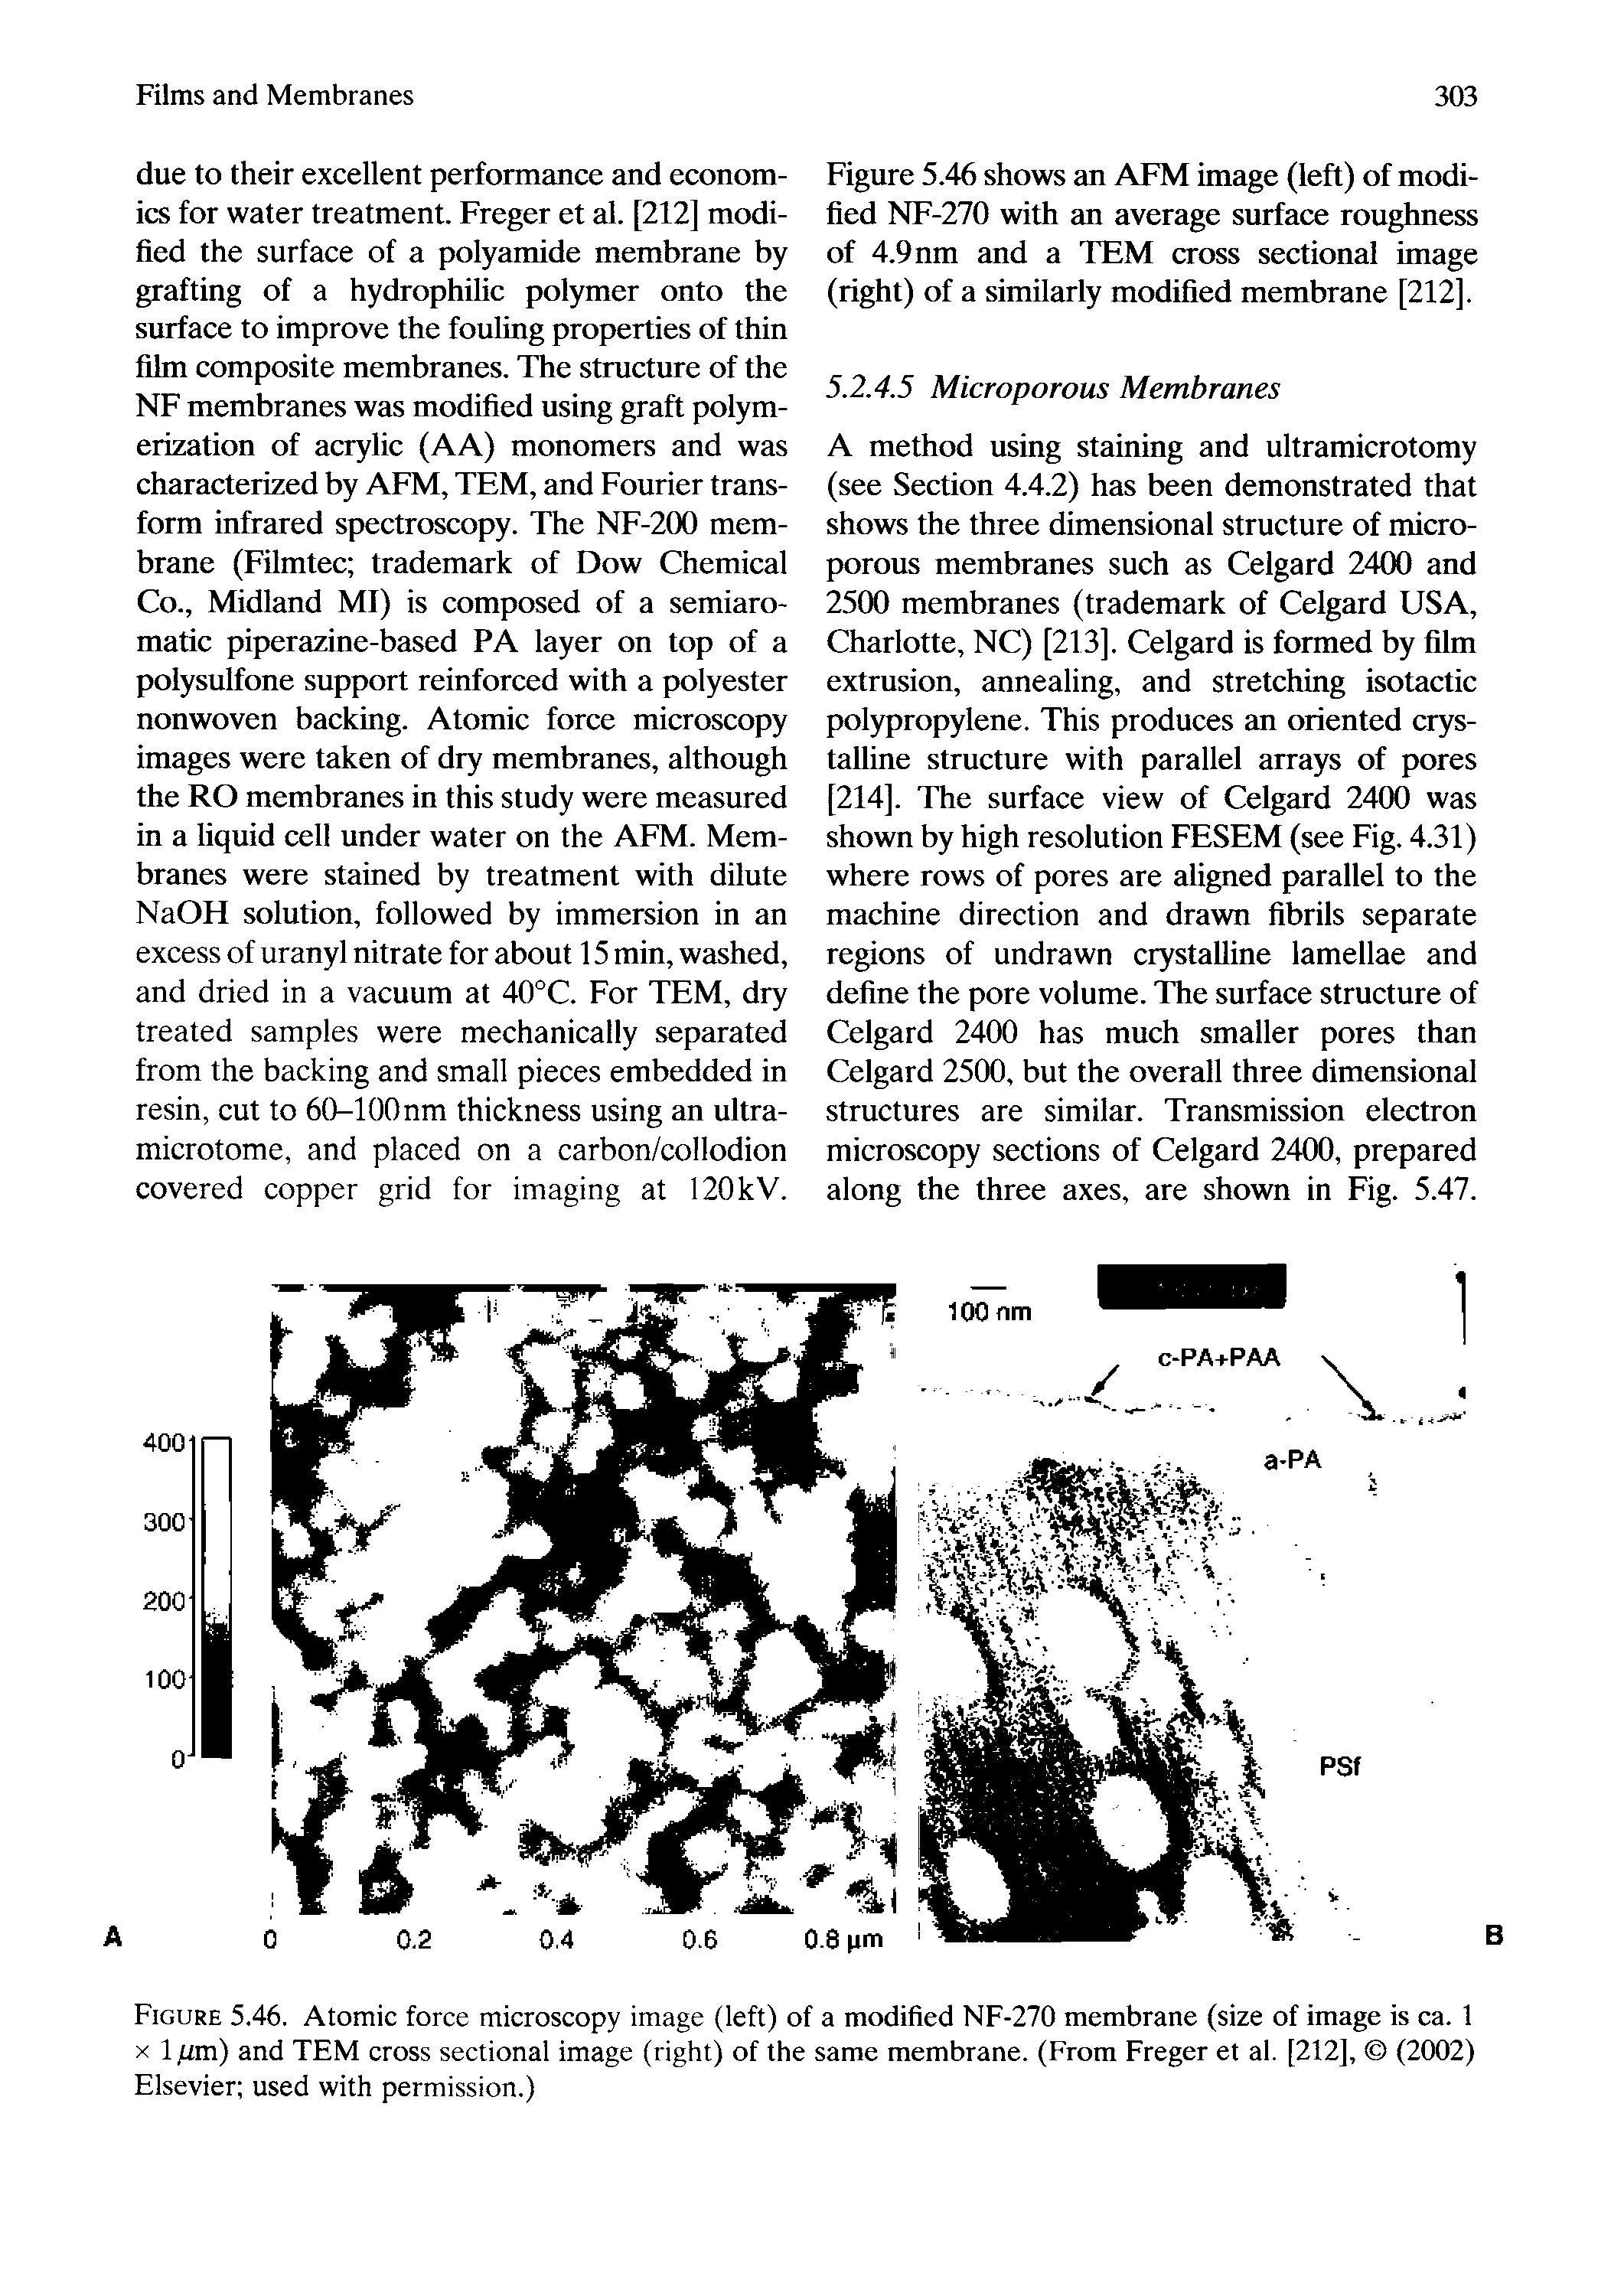 Figure 5.46. Atomic force microscopy image (left) of a modified NF-270 membrane (size of image is ca. 1 X 1 pxa) and TEM cross sectional image (right) of the same membrane. (From Freger et al. [212], (2002) Elsevier used with permission.)...